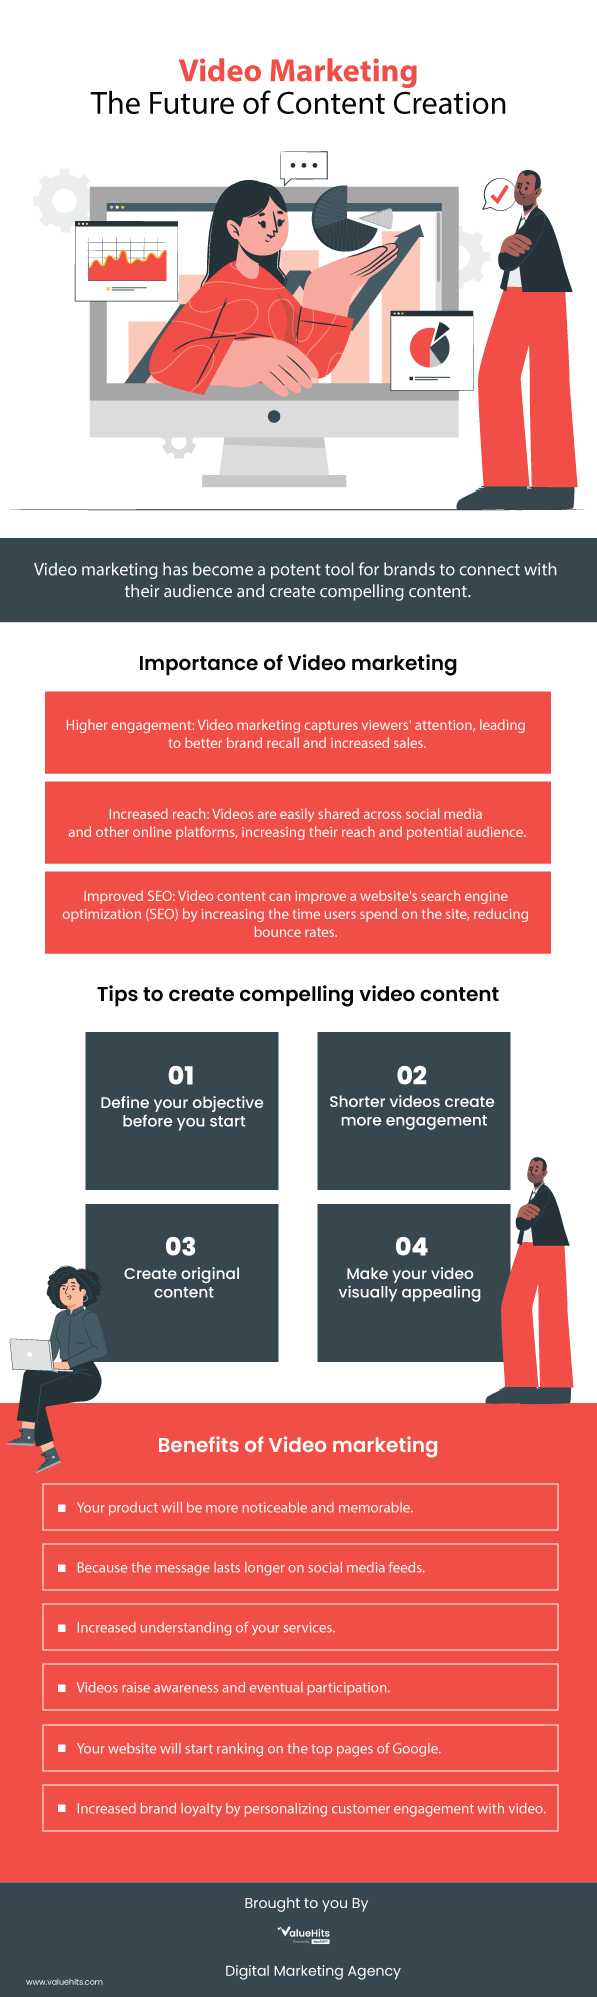  Video Marketing - The Future of Content Creation